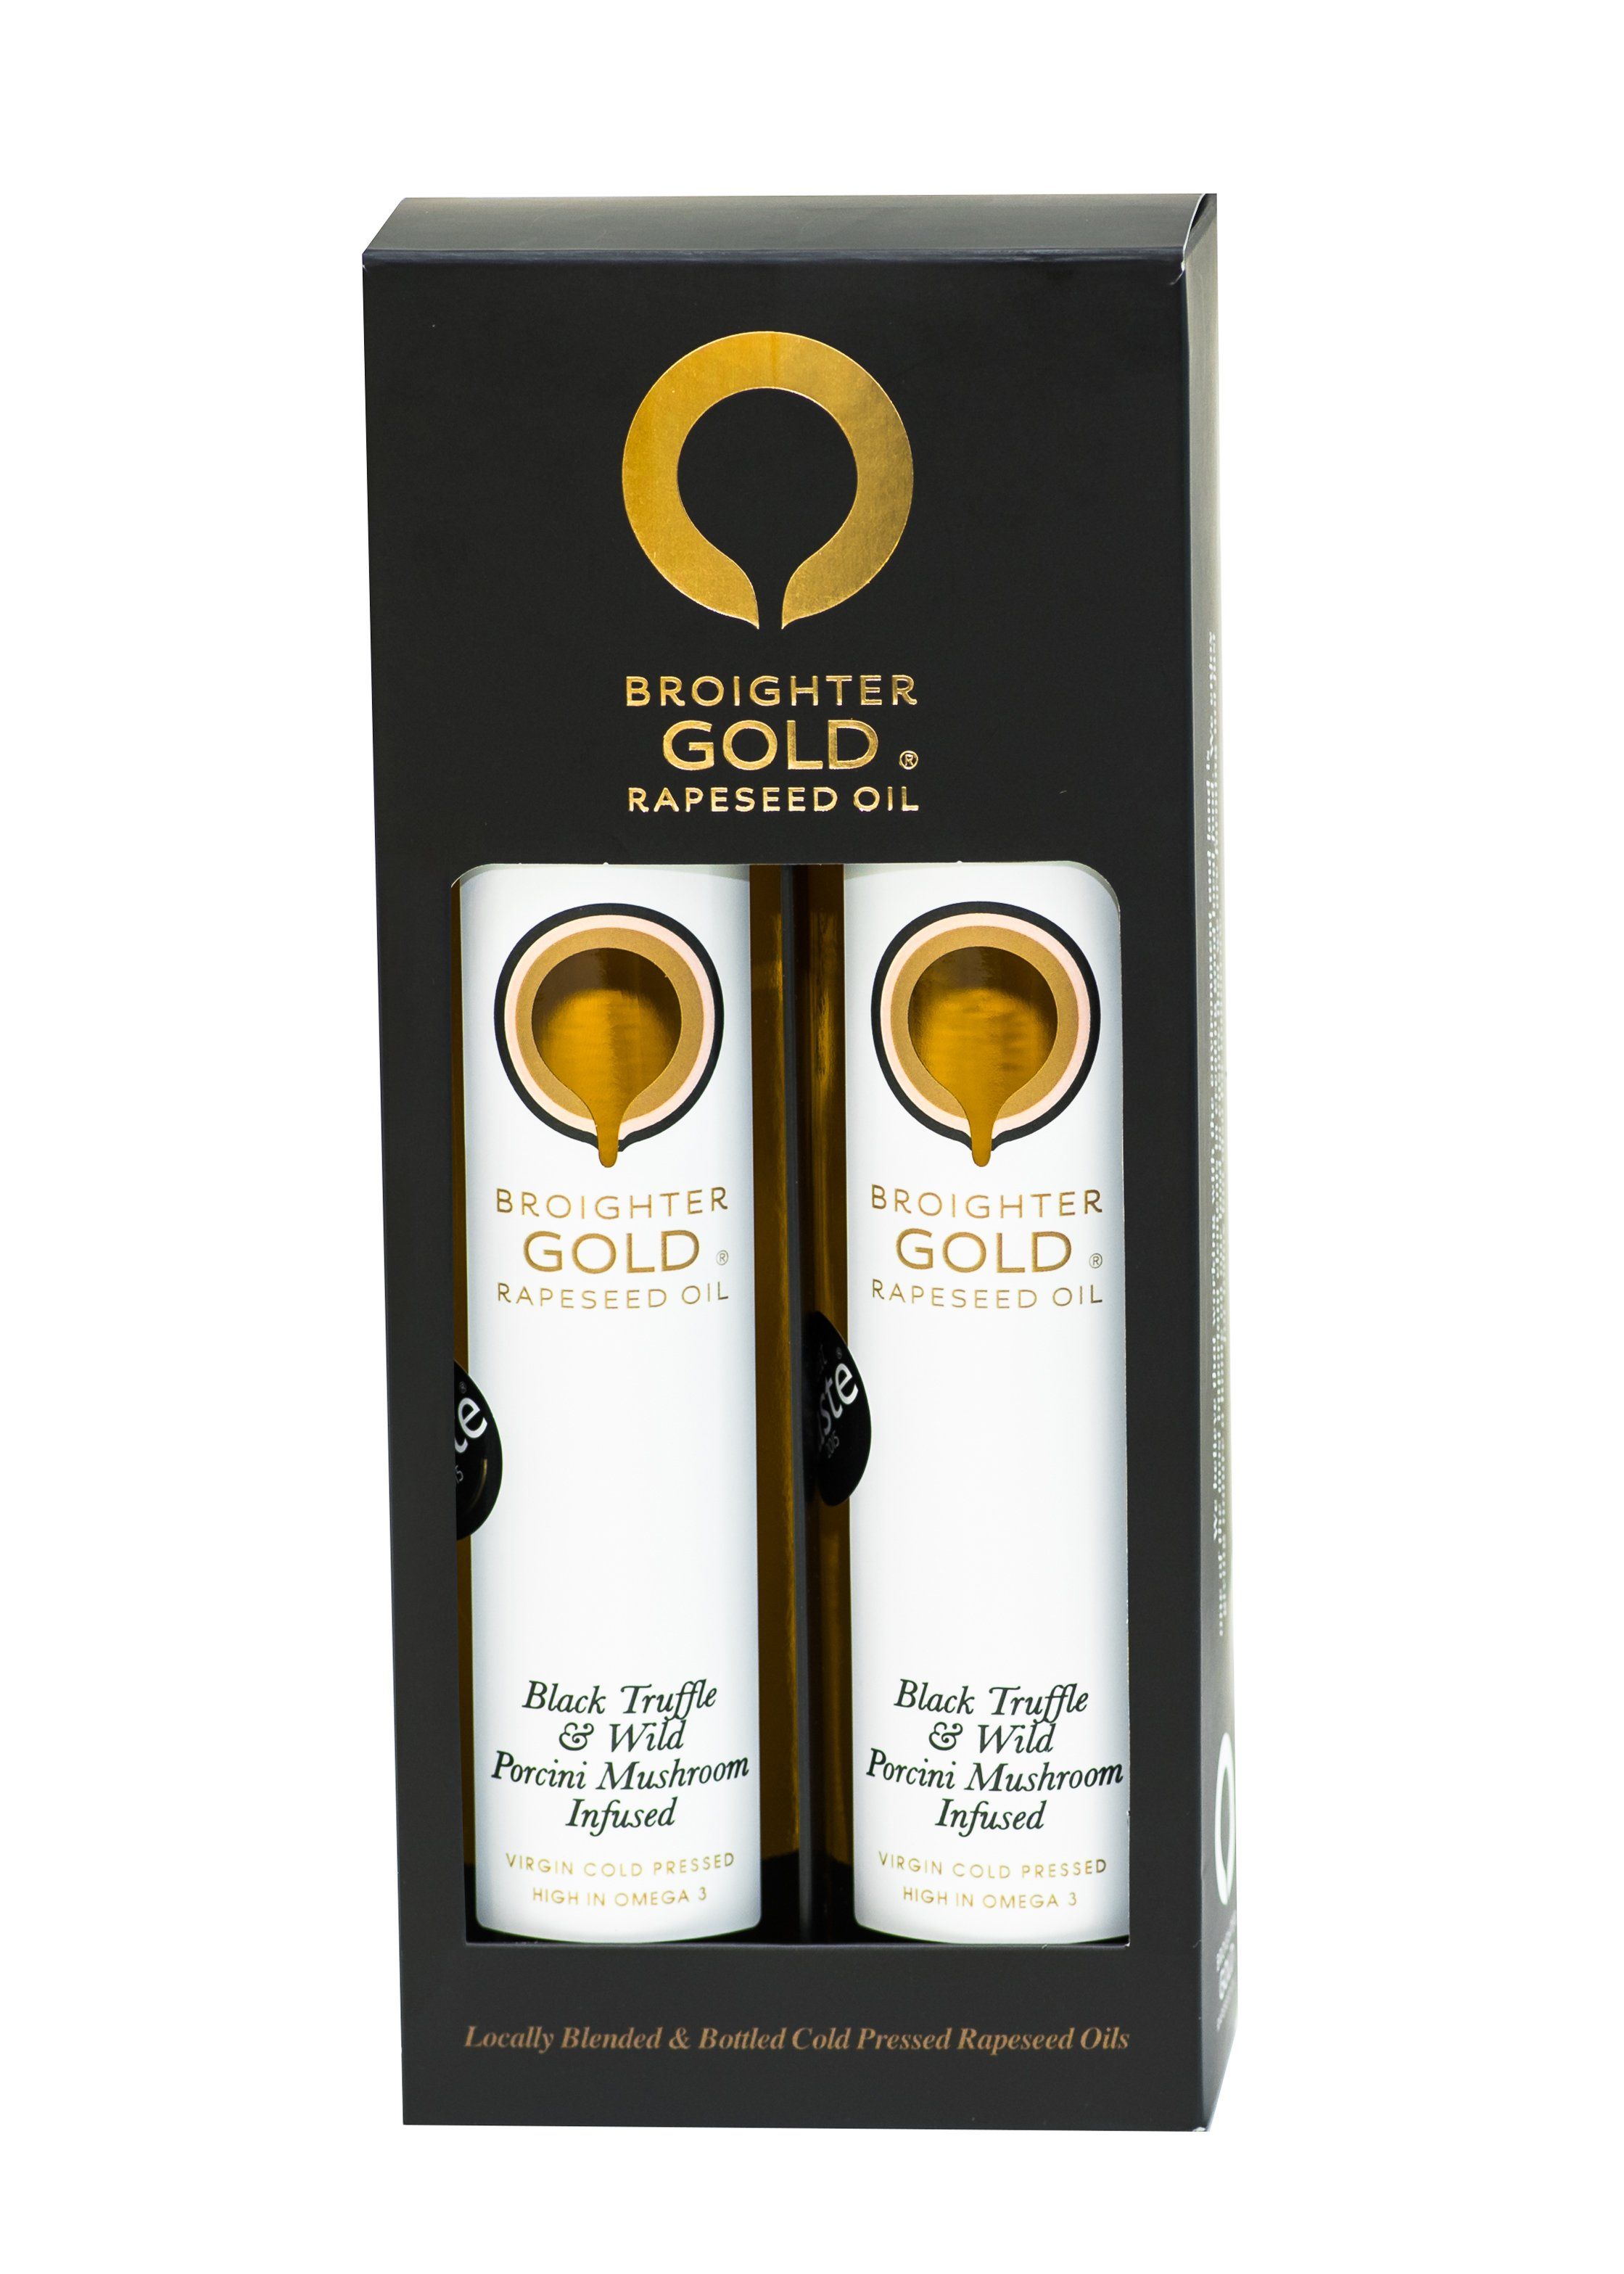 Gourmet Double Black Gift Box Rapeseed Oil Broighter Gold Rapeseed Oil